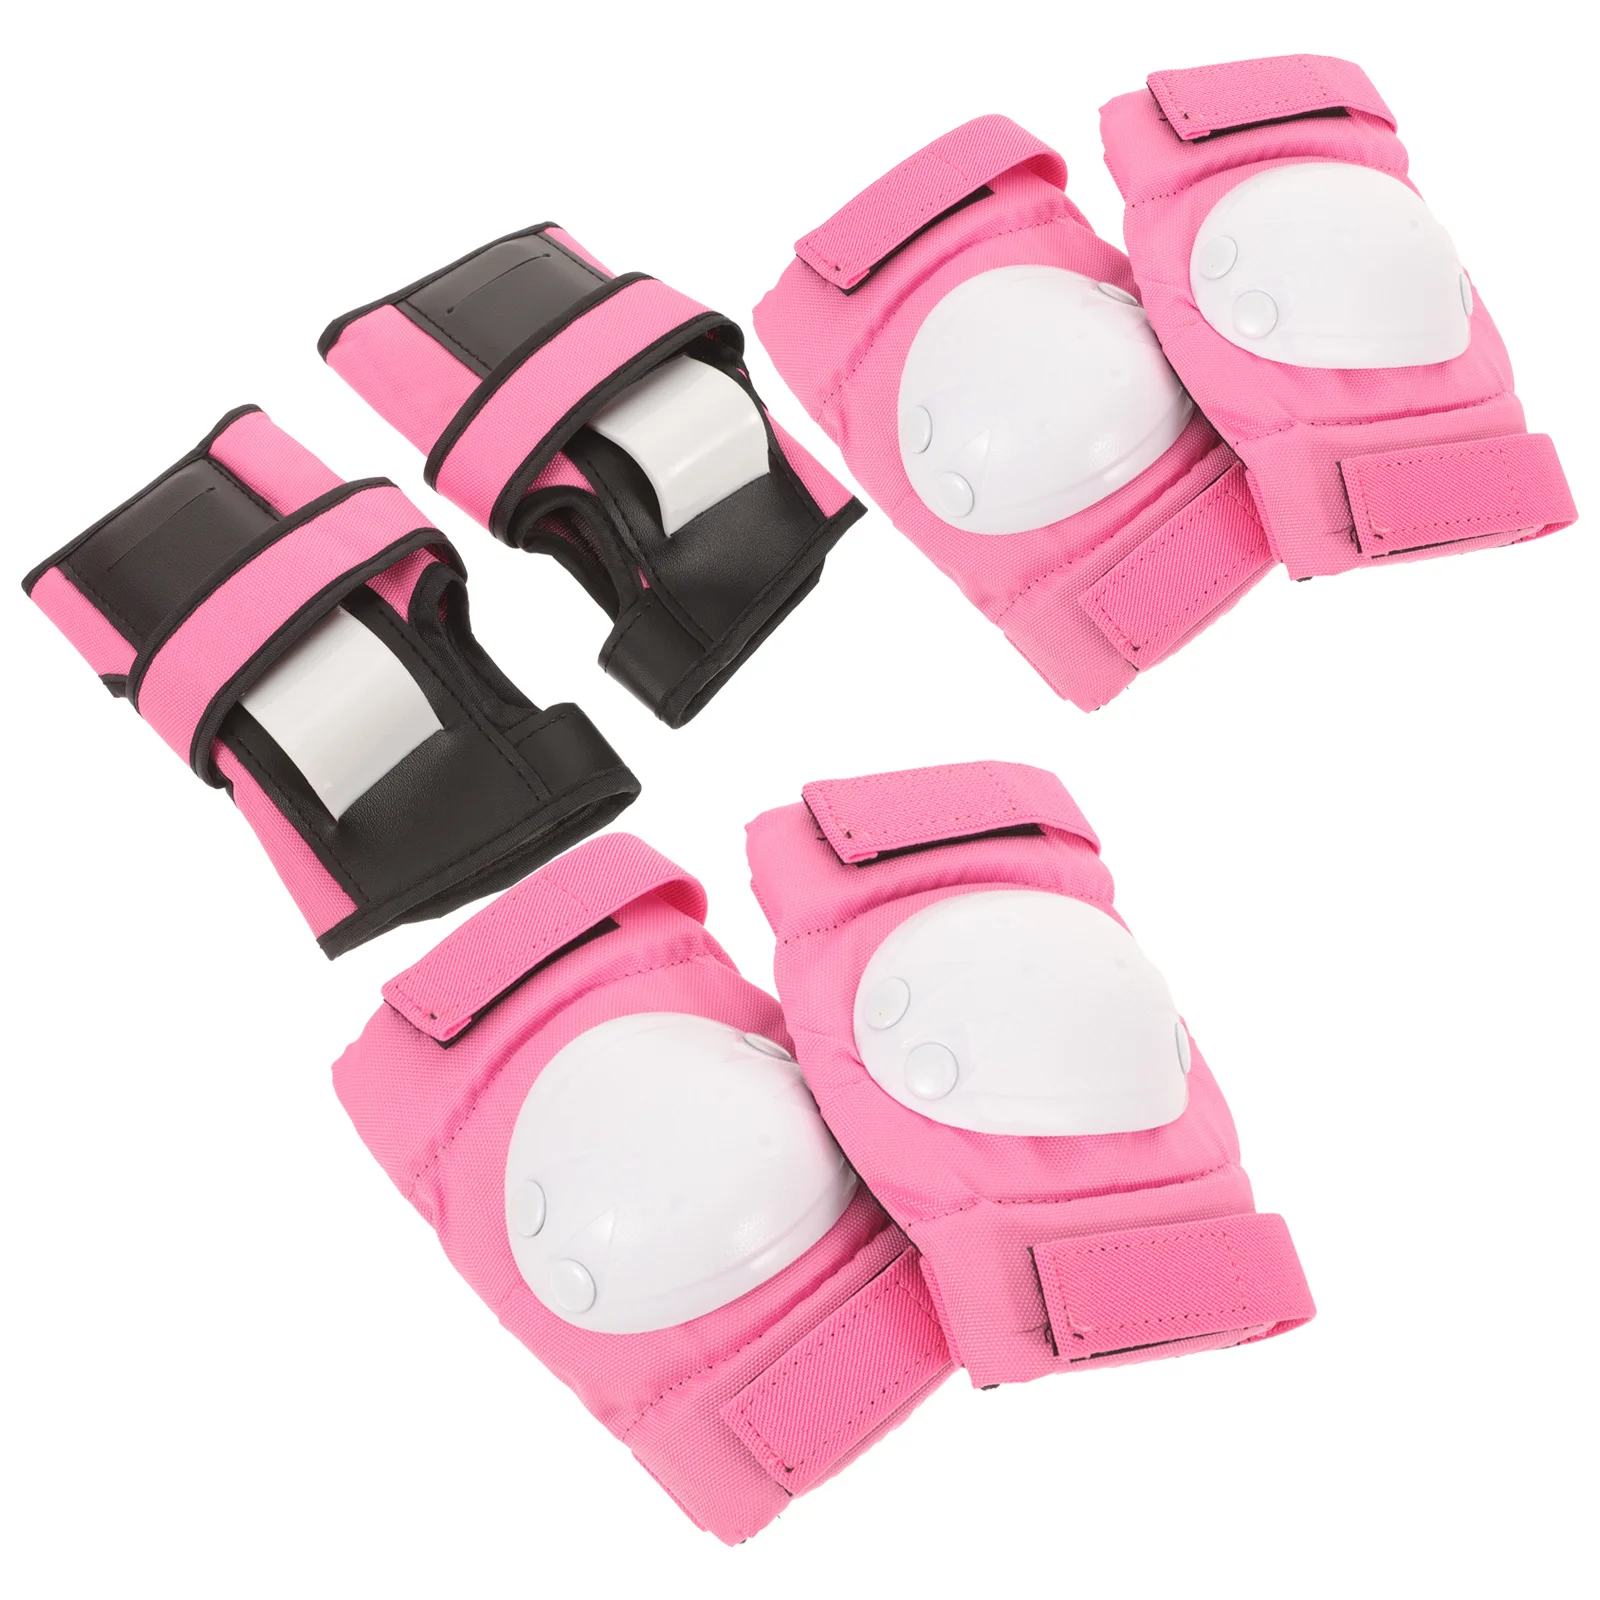 

Knee Brace Skating Protective Gear Aldult Sports Joint Protector Pp Shell Outdoor Elbow Guards Pad Child Hand